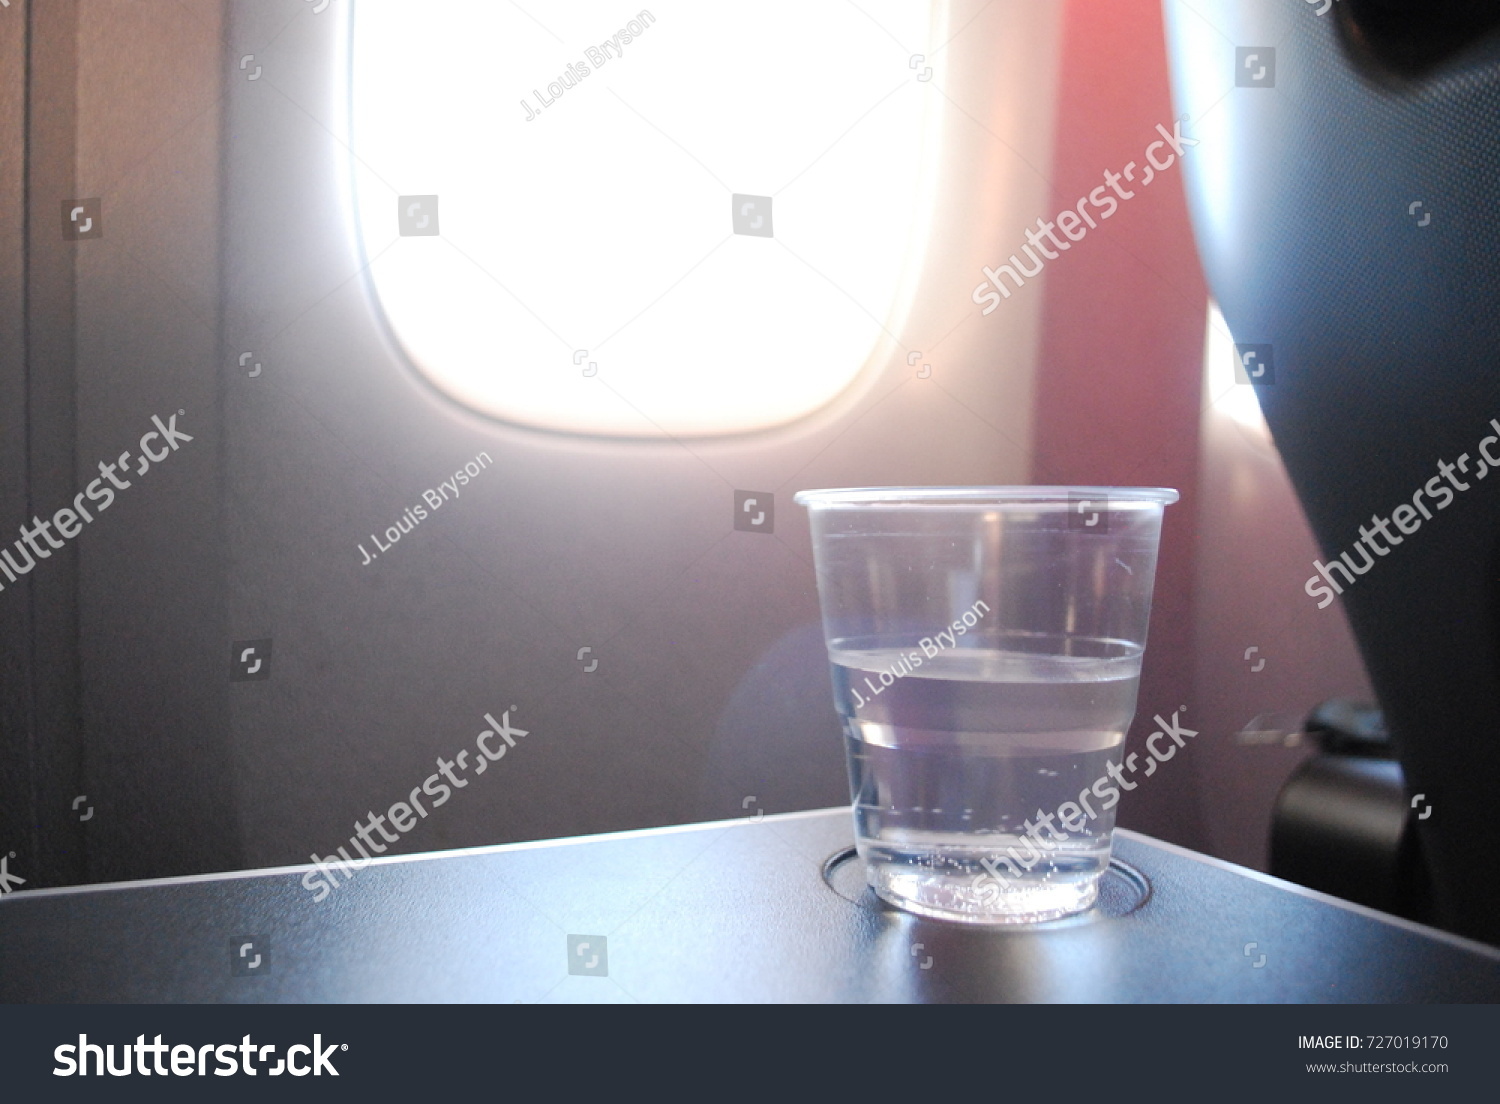 Cup Of Water In Airplane, Travel #727019170